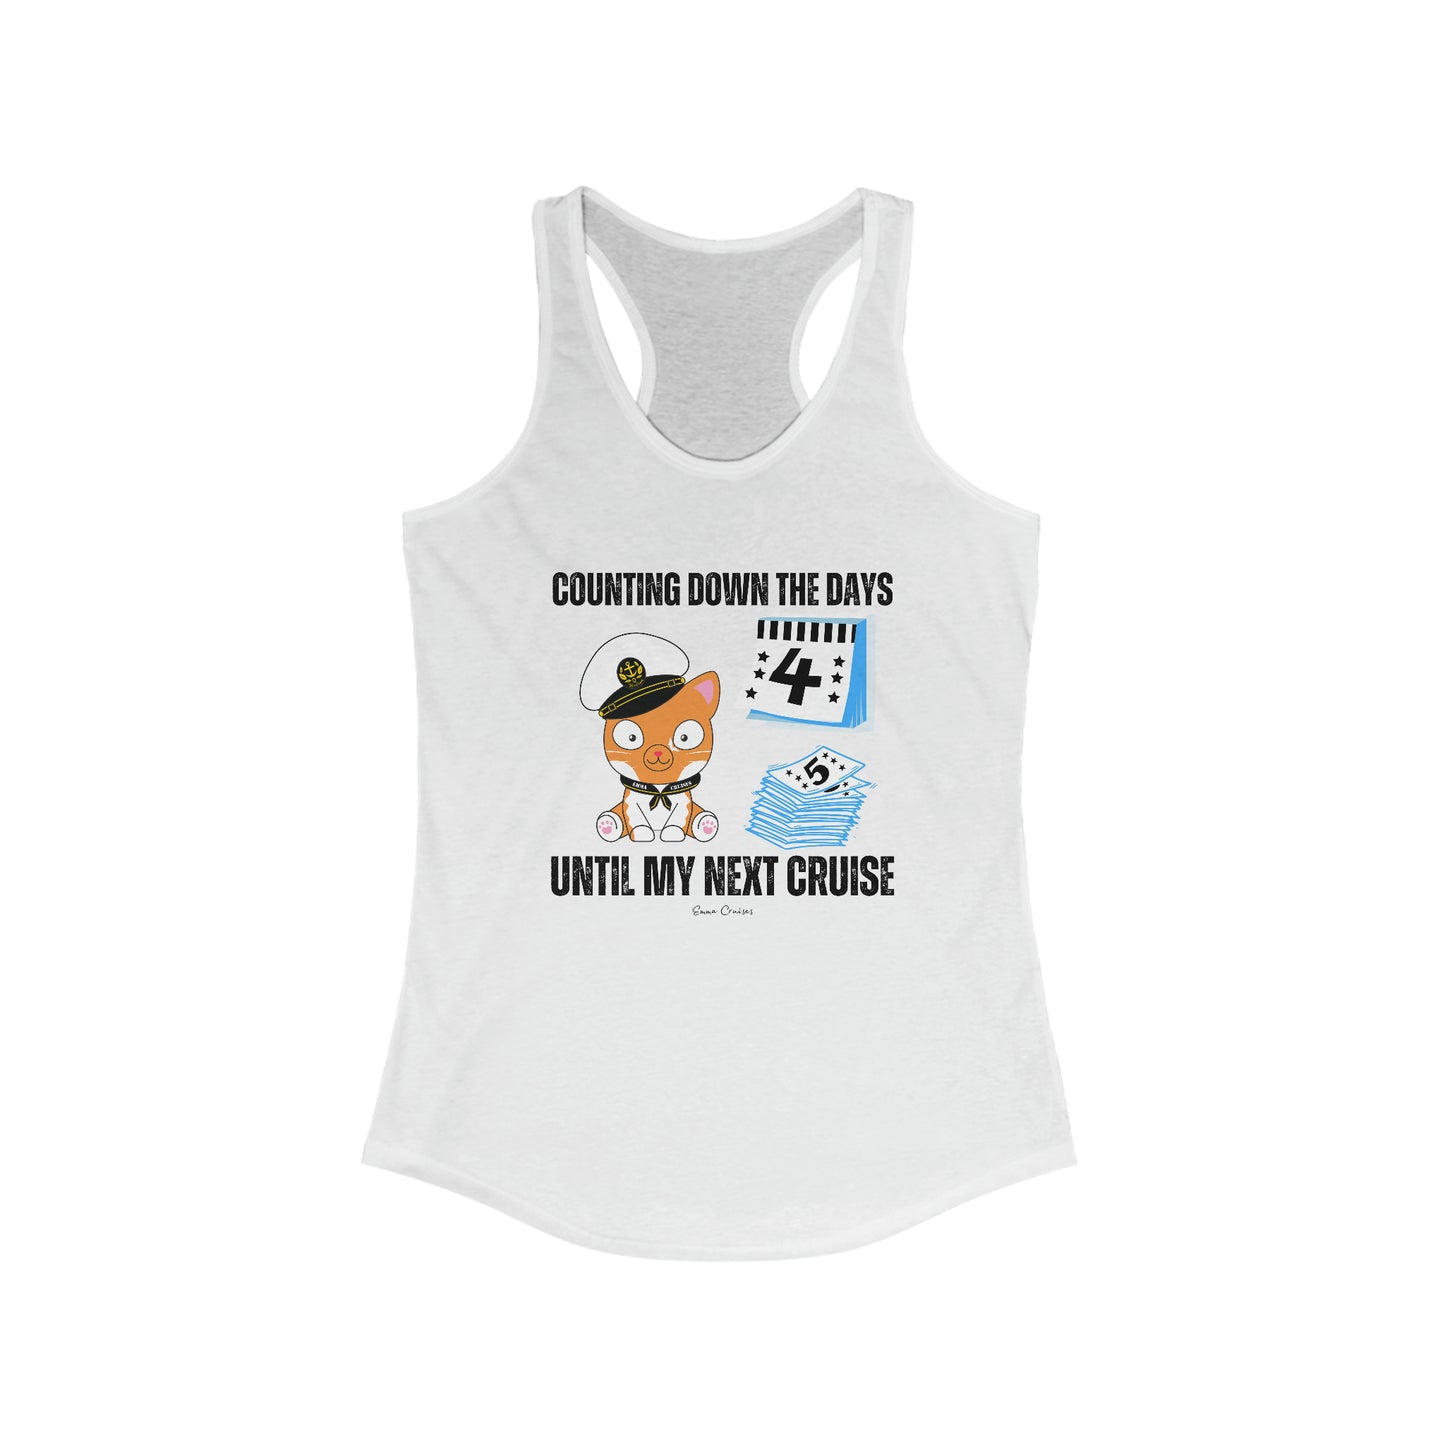 Counting Down the Days - Tank Top